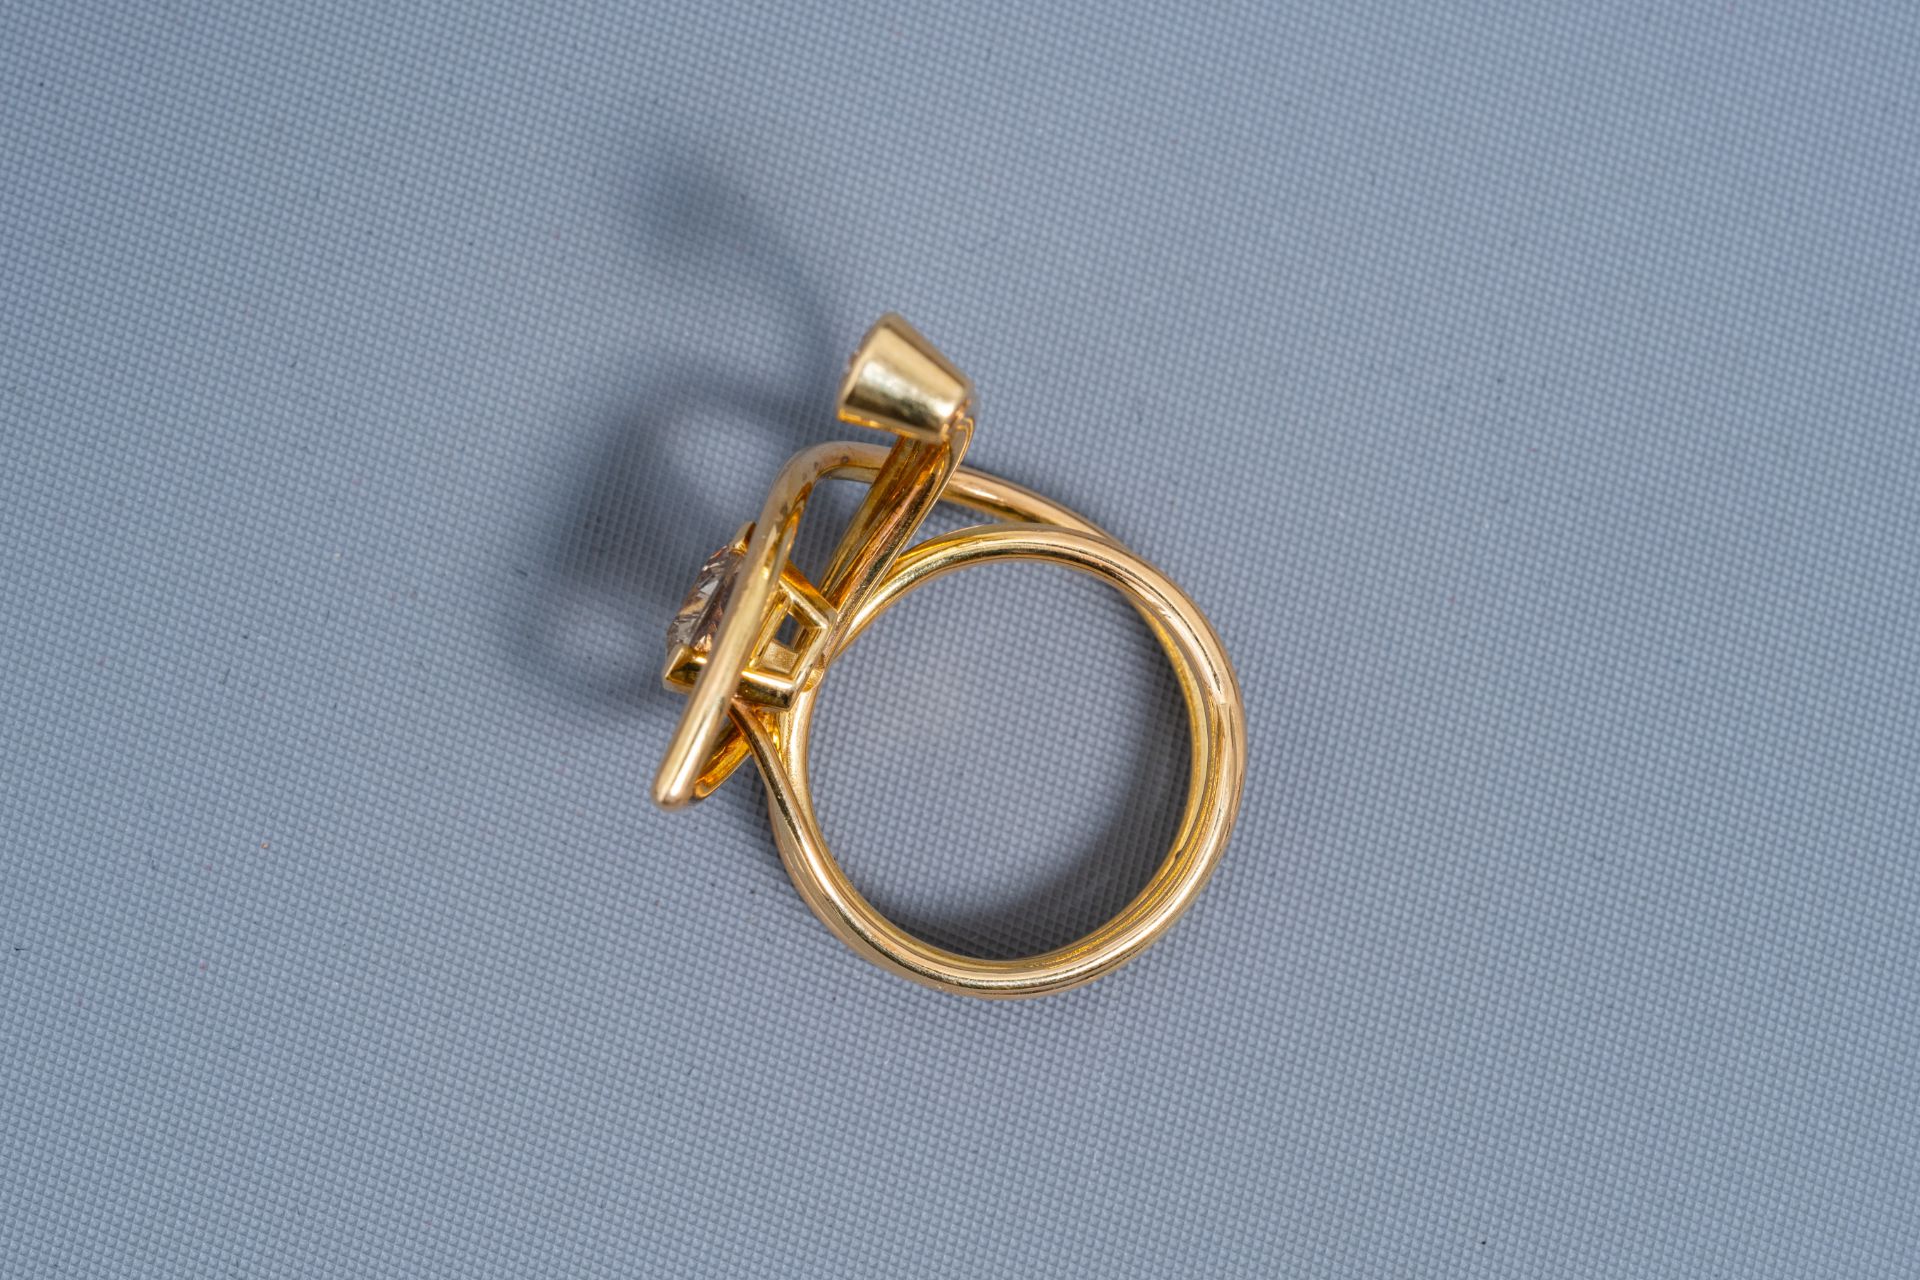 An 18 carat yellow gold ring set with a sapphire and two diamonds, 20th C. - Image 4 of 6